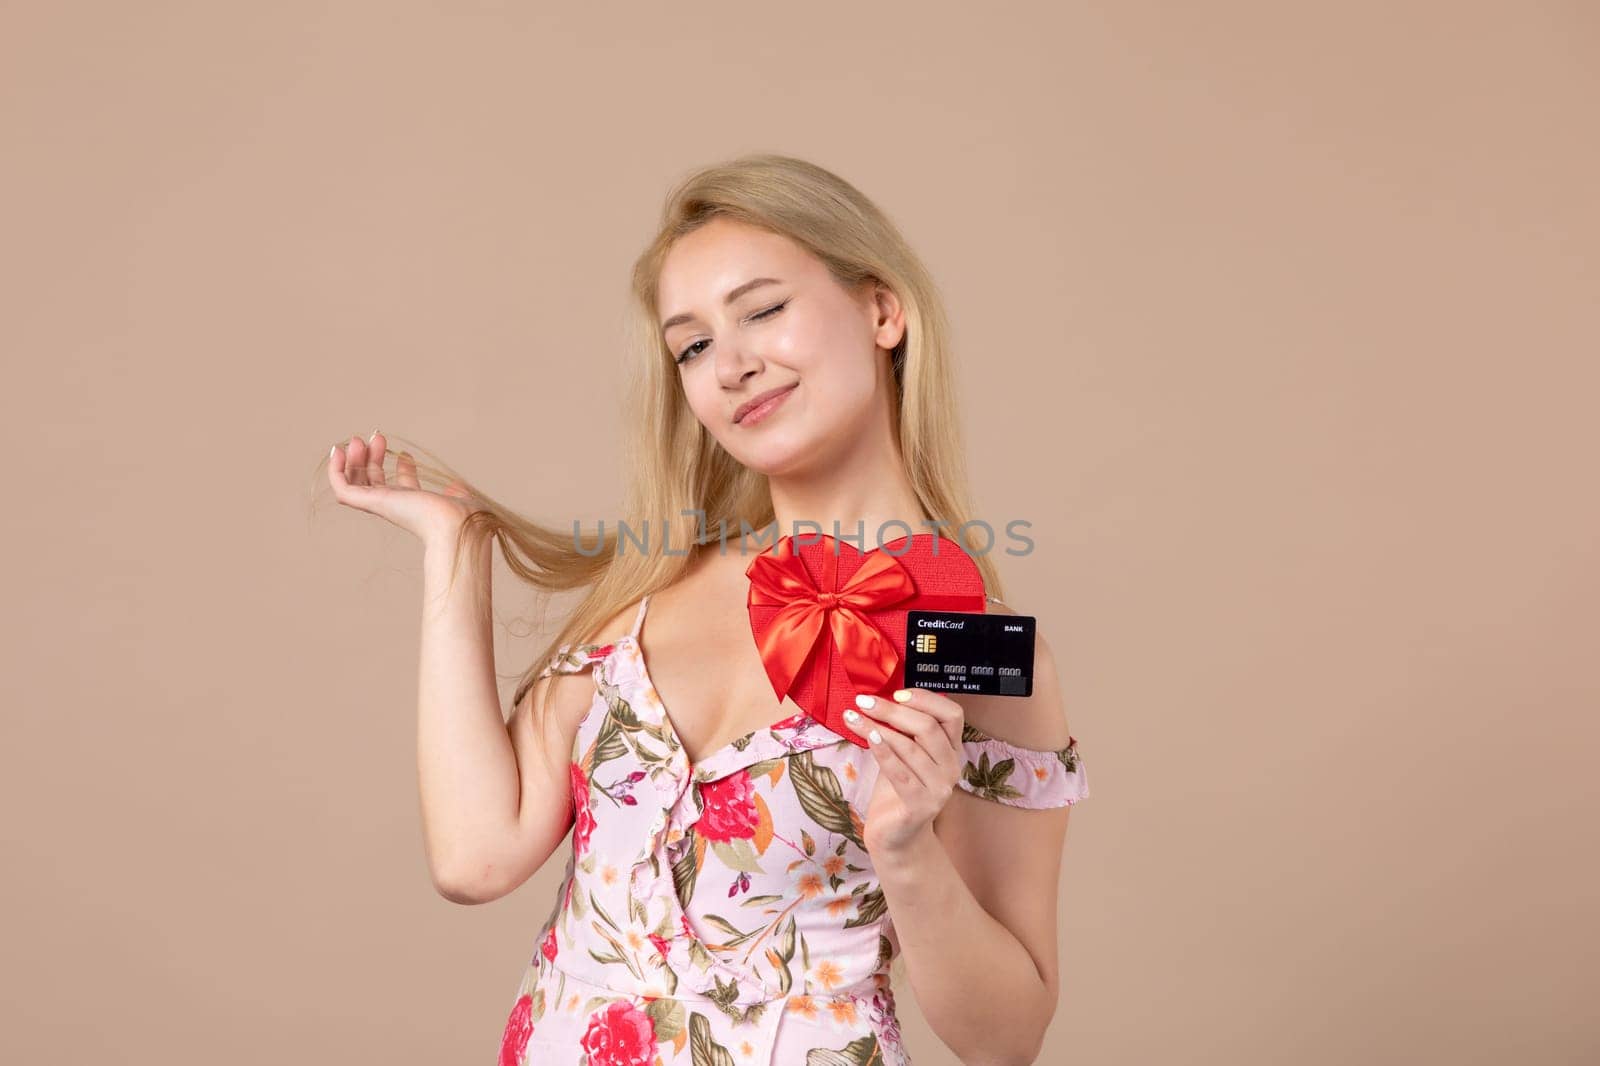 front view young female posing with red heart shaped present and bank card on brown background money march woman sensual horizontal equality by Kamran